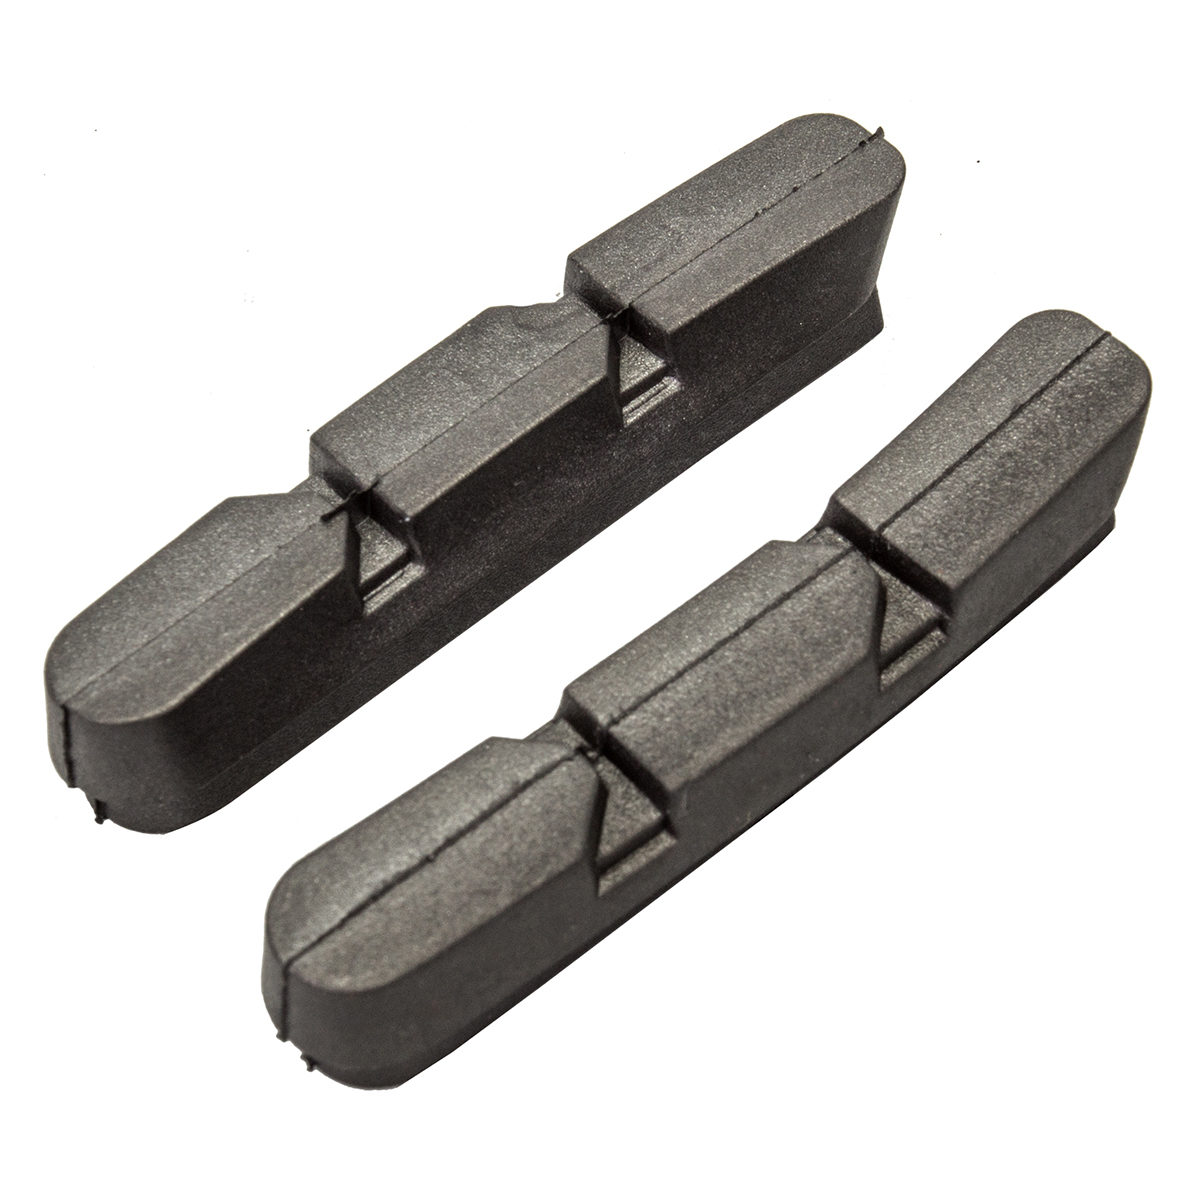 Koolstop Road Pad Inserts Brake Shoes K/s Campy Pad S Record Carbon - image 1 of 2